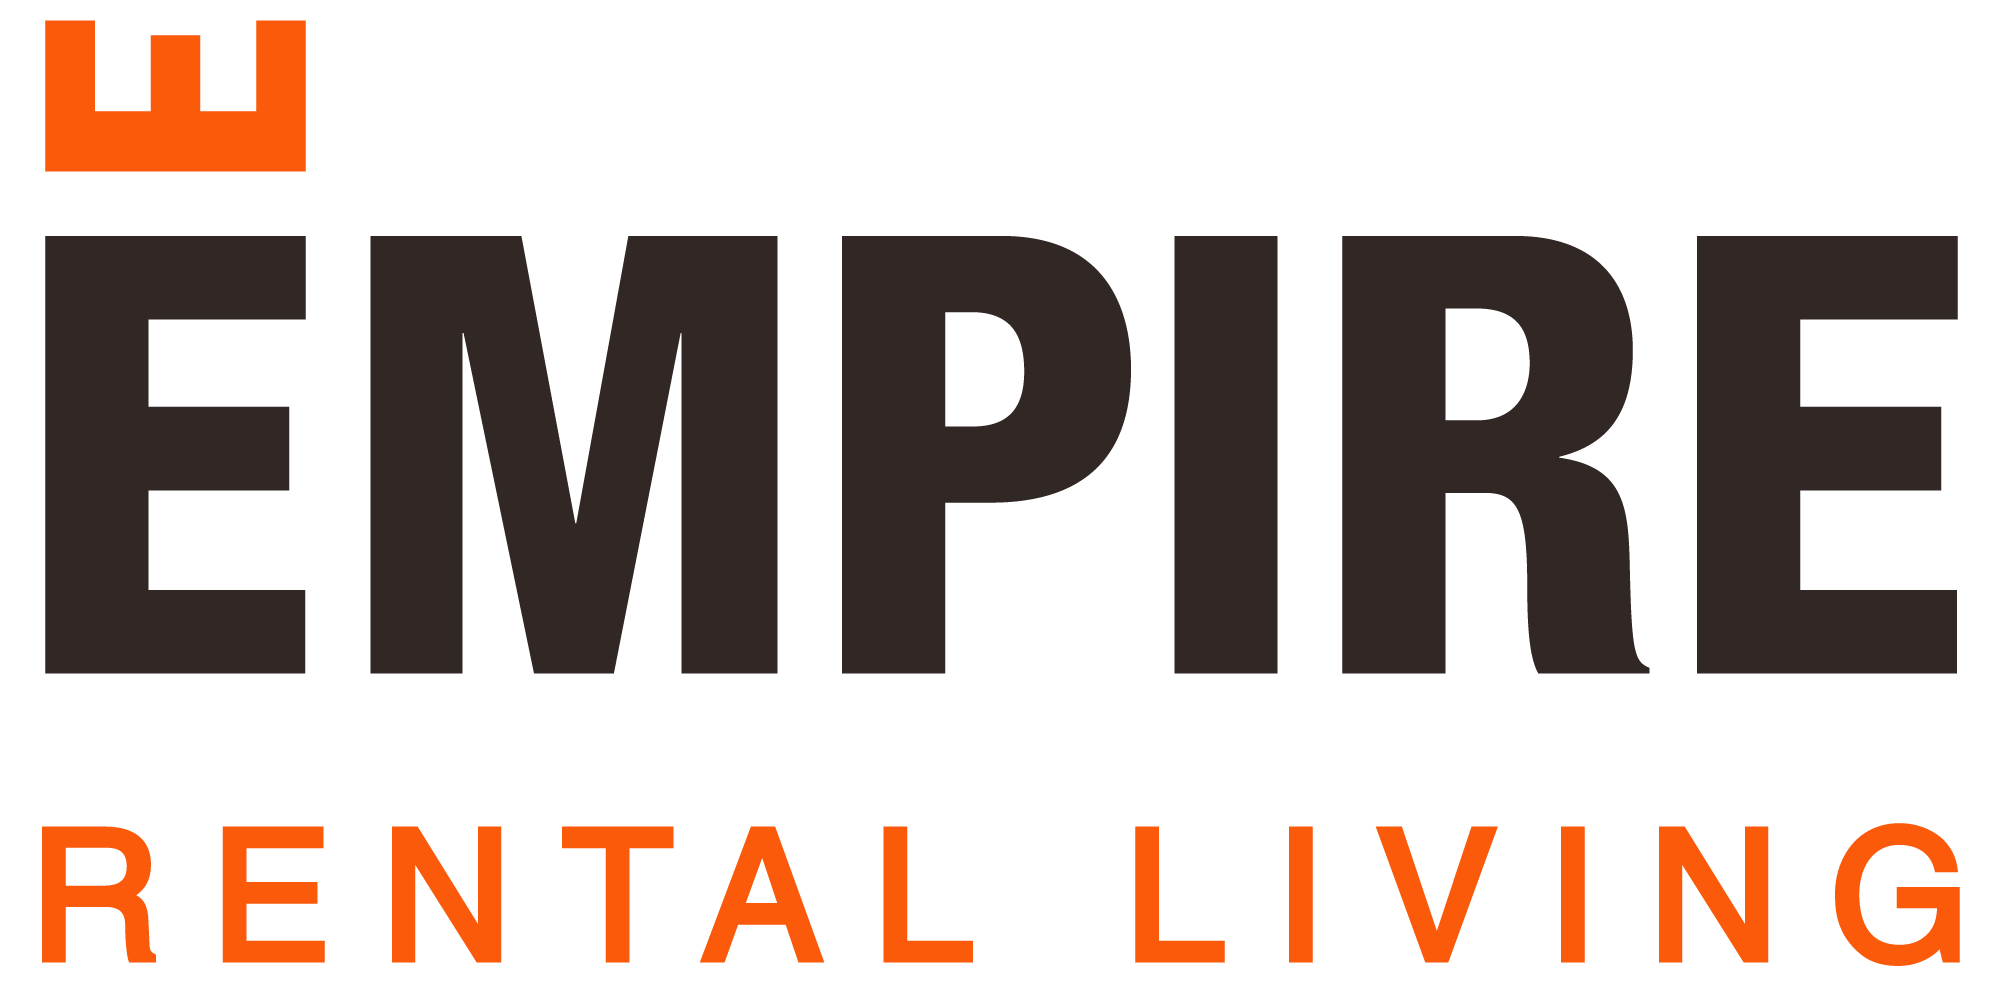 Empire Rental Living by Empire Communities